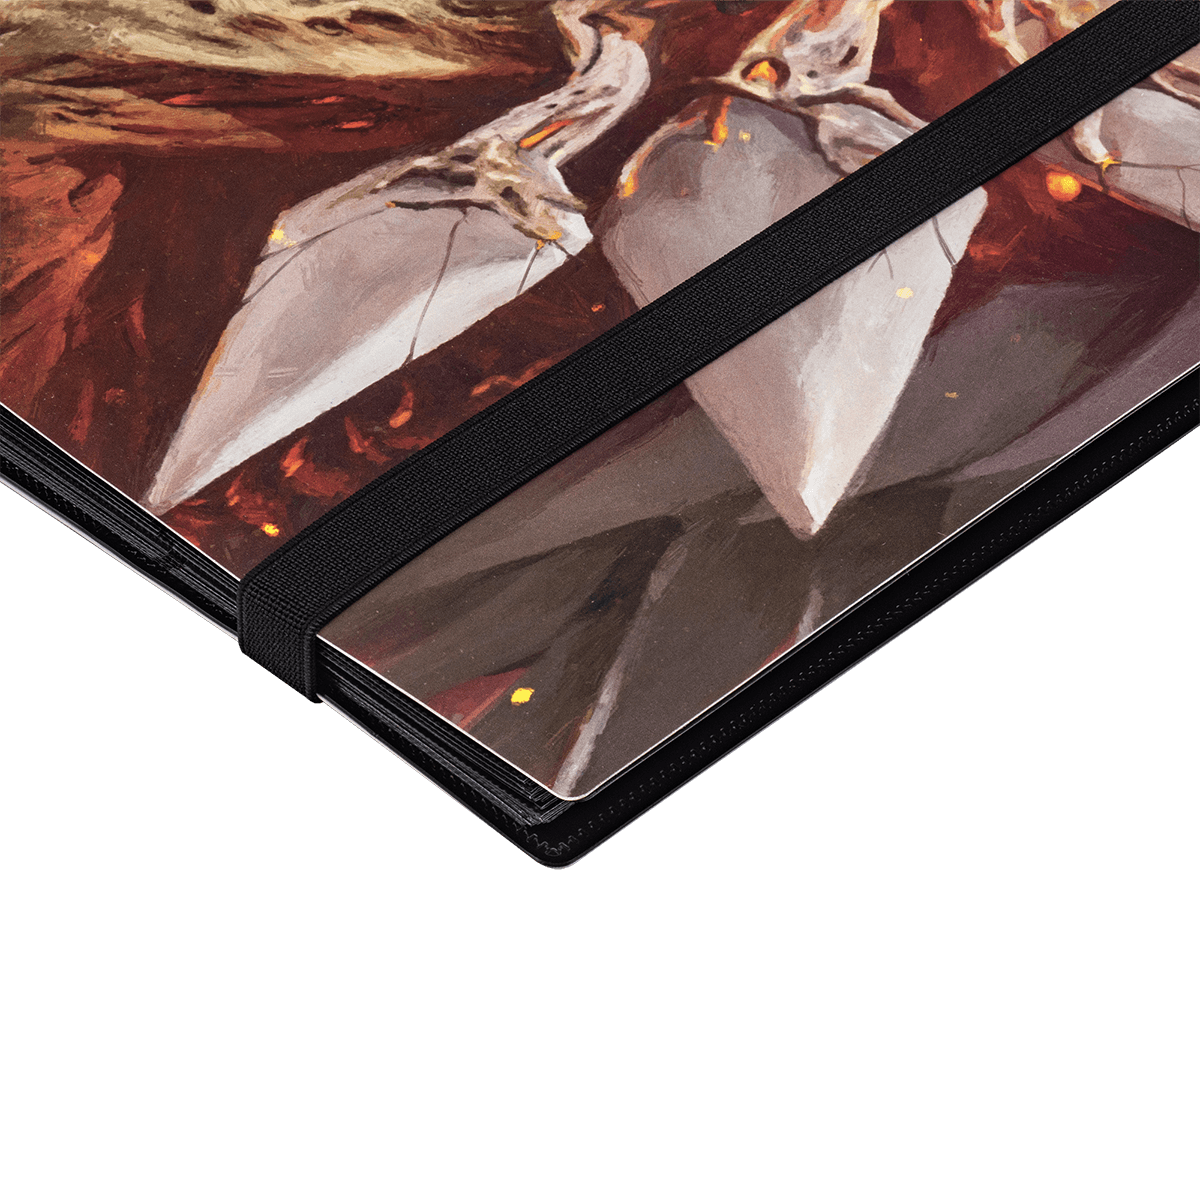 March of the Machine 12-Pocket PRO-Binder for Magic: The Gathering | Ultra PRO International